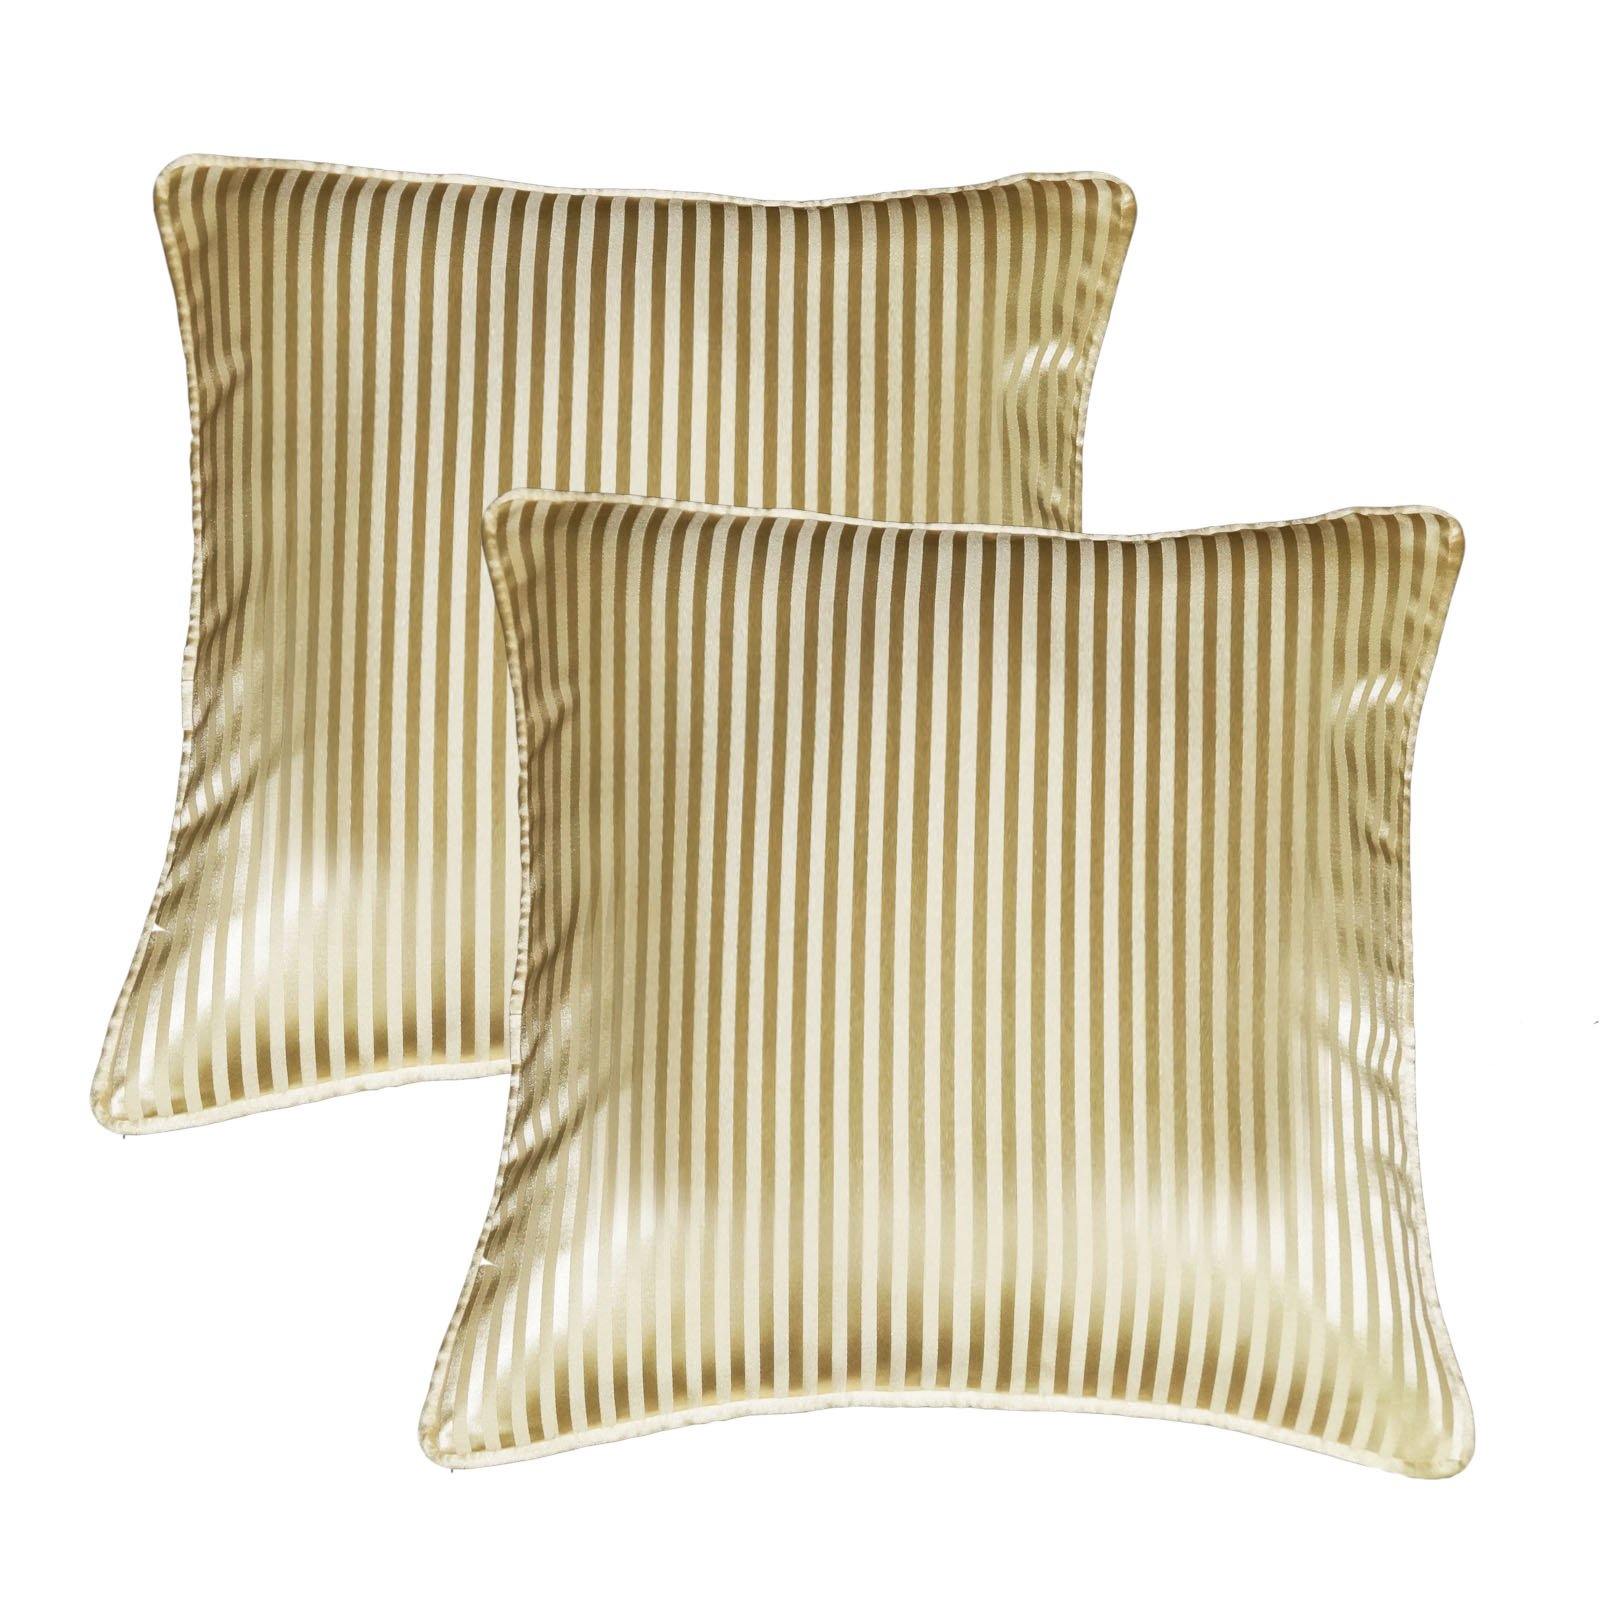 Lushomes champagne contemporary stripped cushion cover with plain piping, 12 x 12‰۝(Pack of 2) Torantina Collection - Lushomes